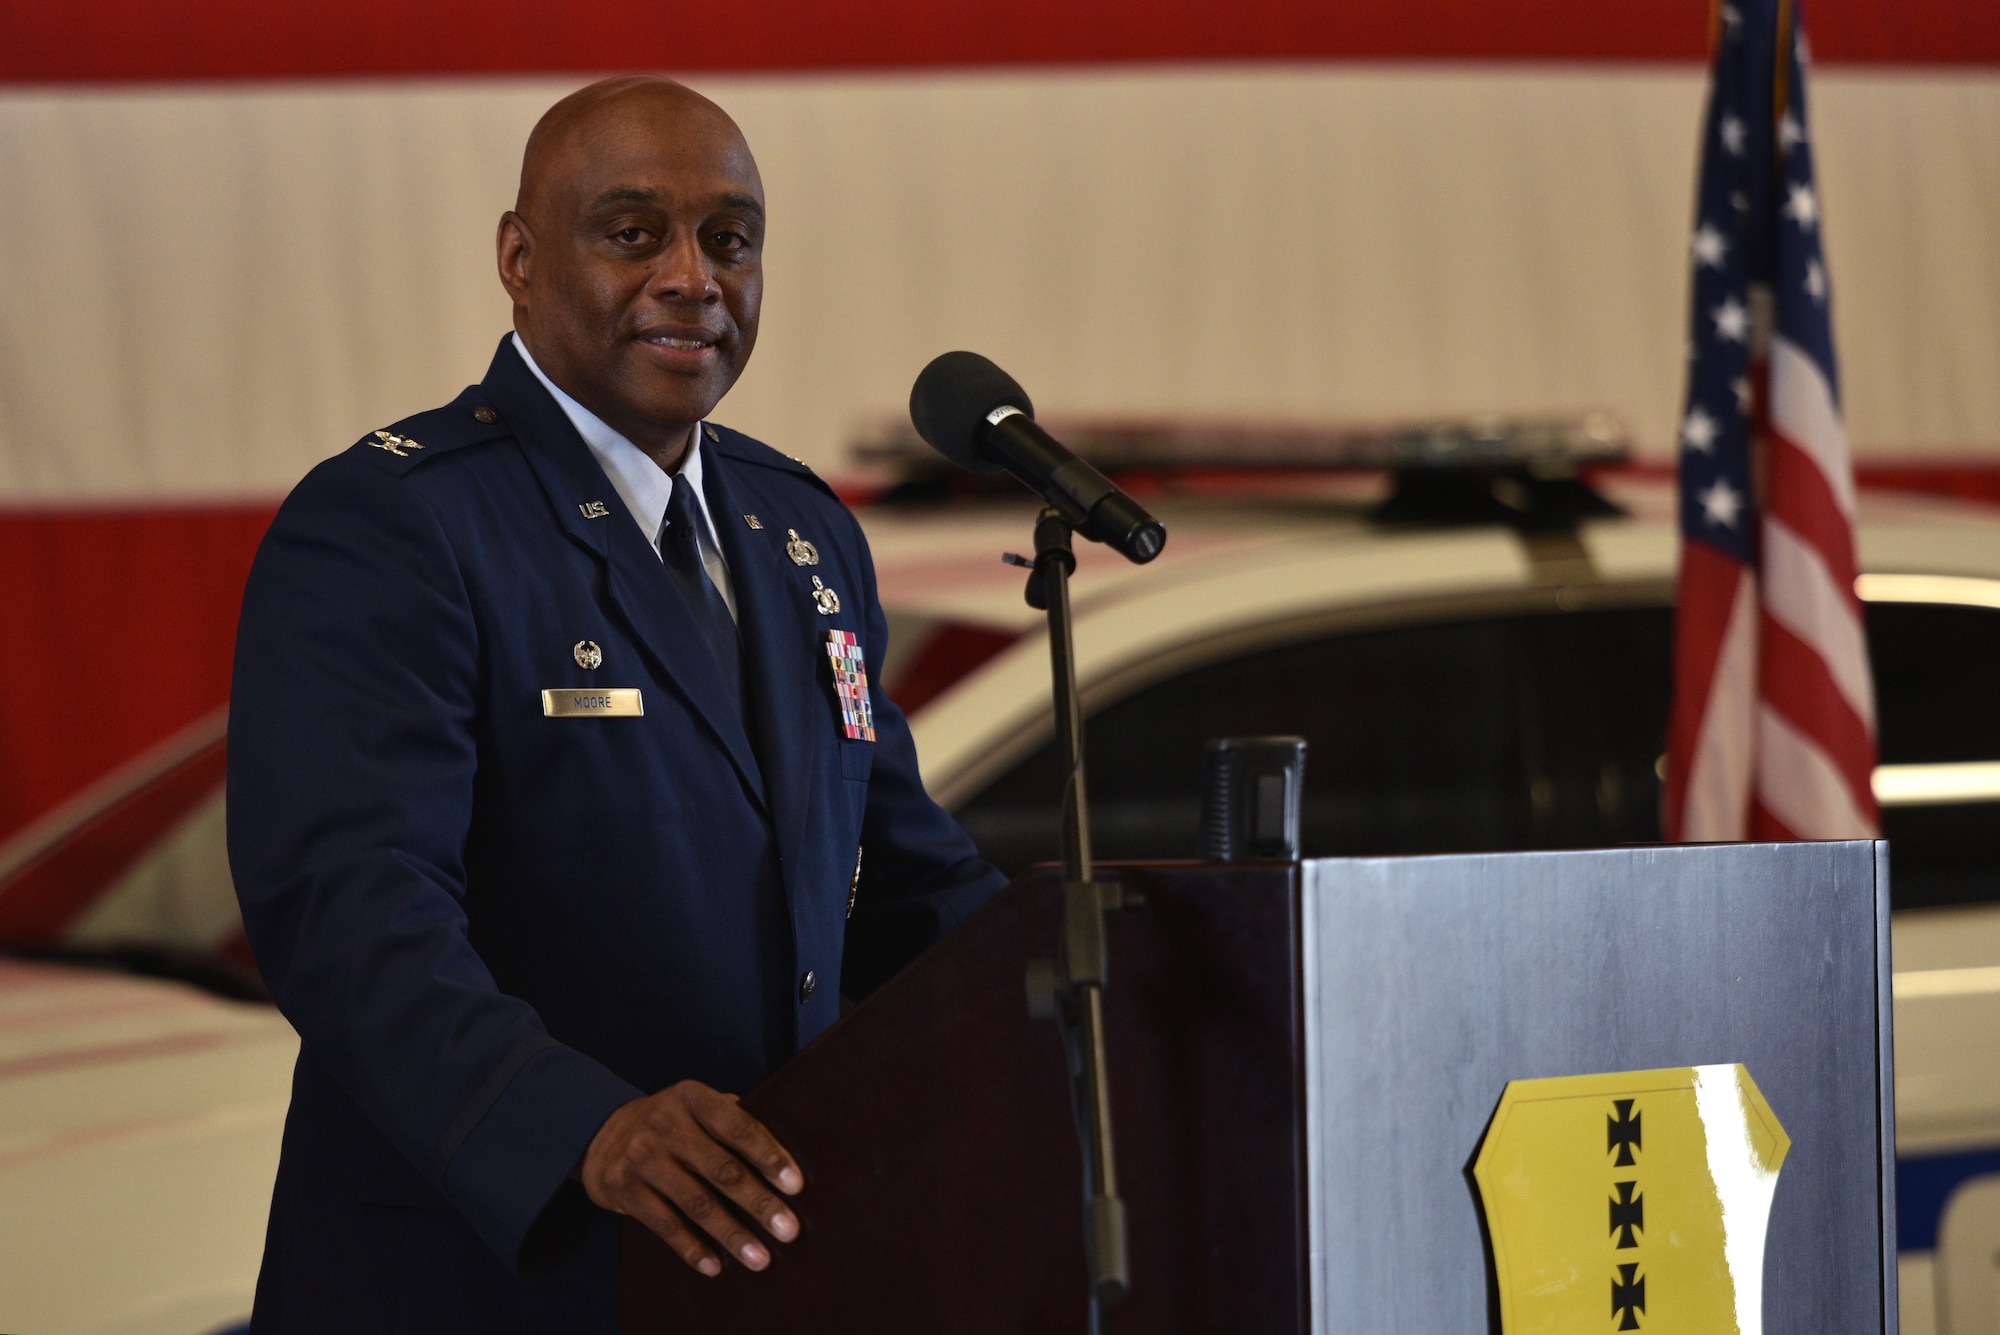 U.S. Air Force Col. Eugene Moore III, incoming 17th Mission Support Group commander, speaks during the change of command ceremony on Goodfellow Air Force Base, Texas, June 23, 2021. The 17th MSG provides installation support and services necessary to train, develop, and inspire the future force. (U.S. Air Force photo by Senior Airman Ashley Thrash)